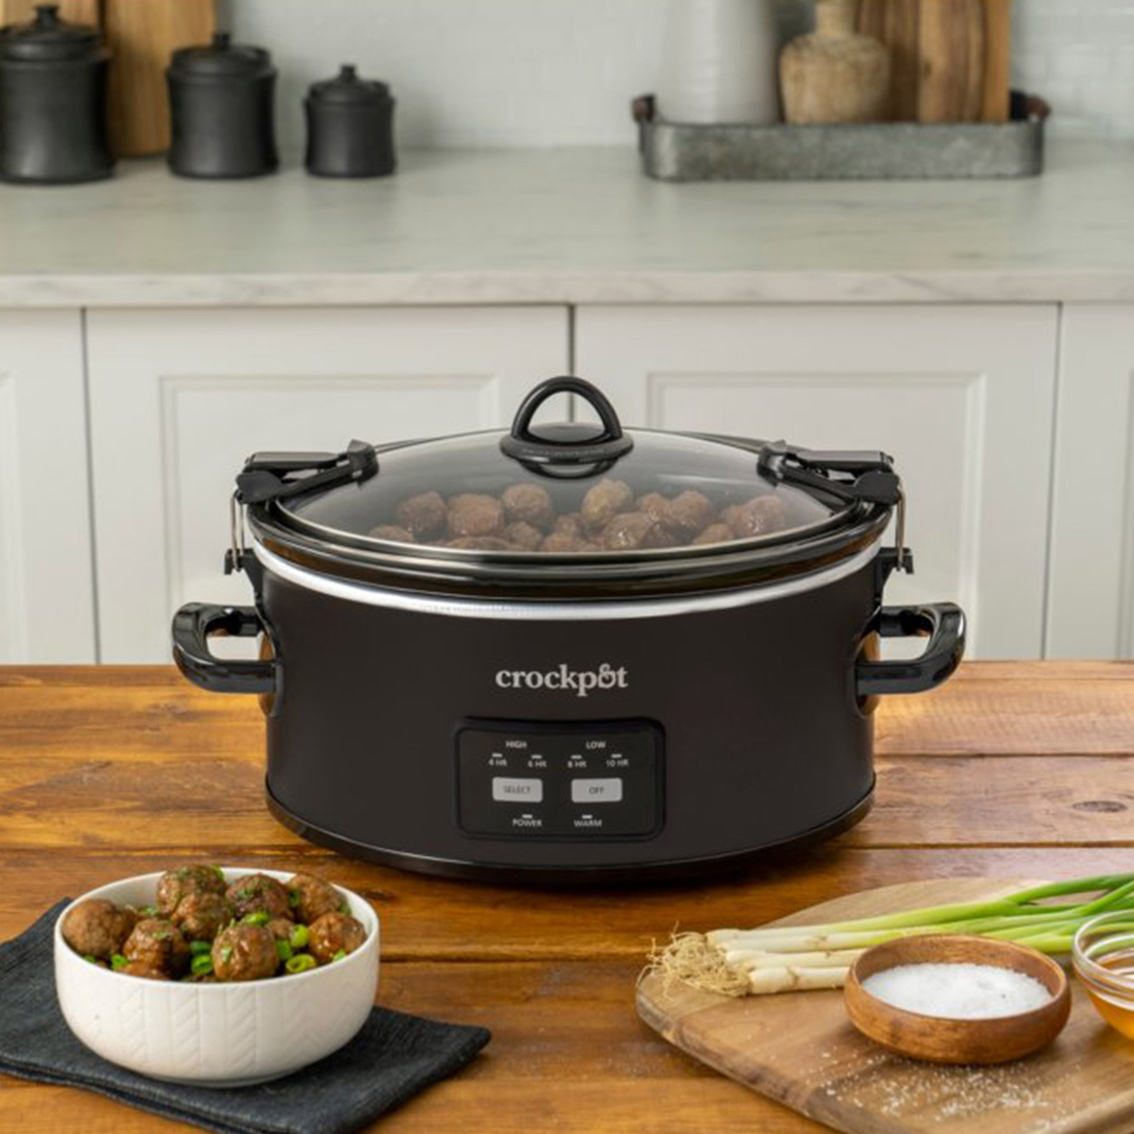 Crock-Pot 6 qt. Programmable Cook and Carry Stainless Steel Slow Cooker - Image 3 of 3